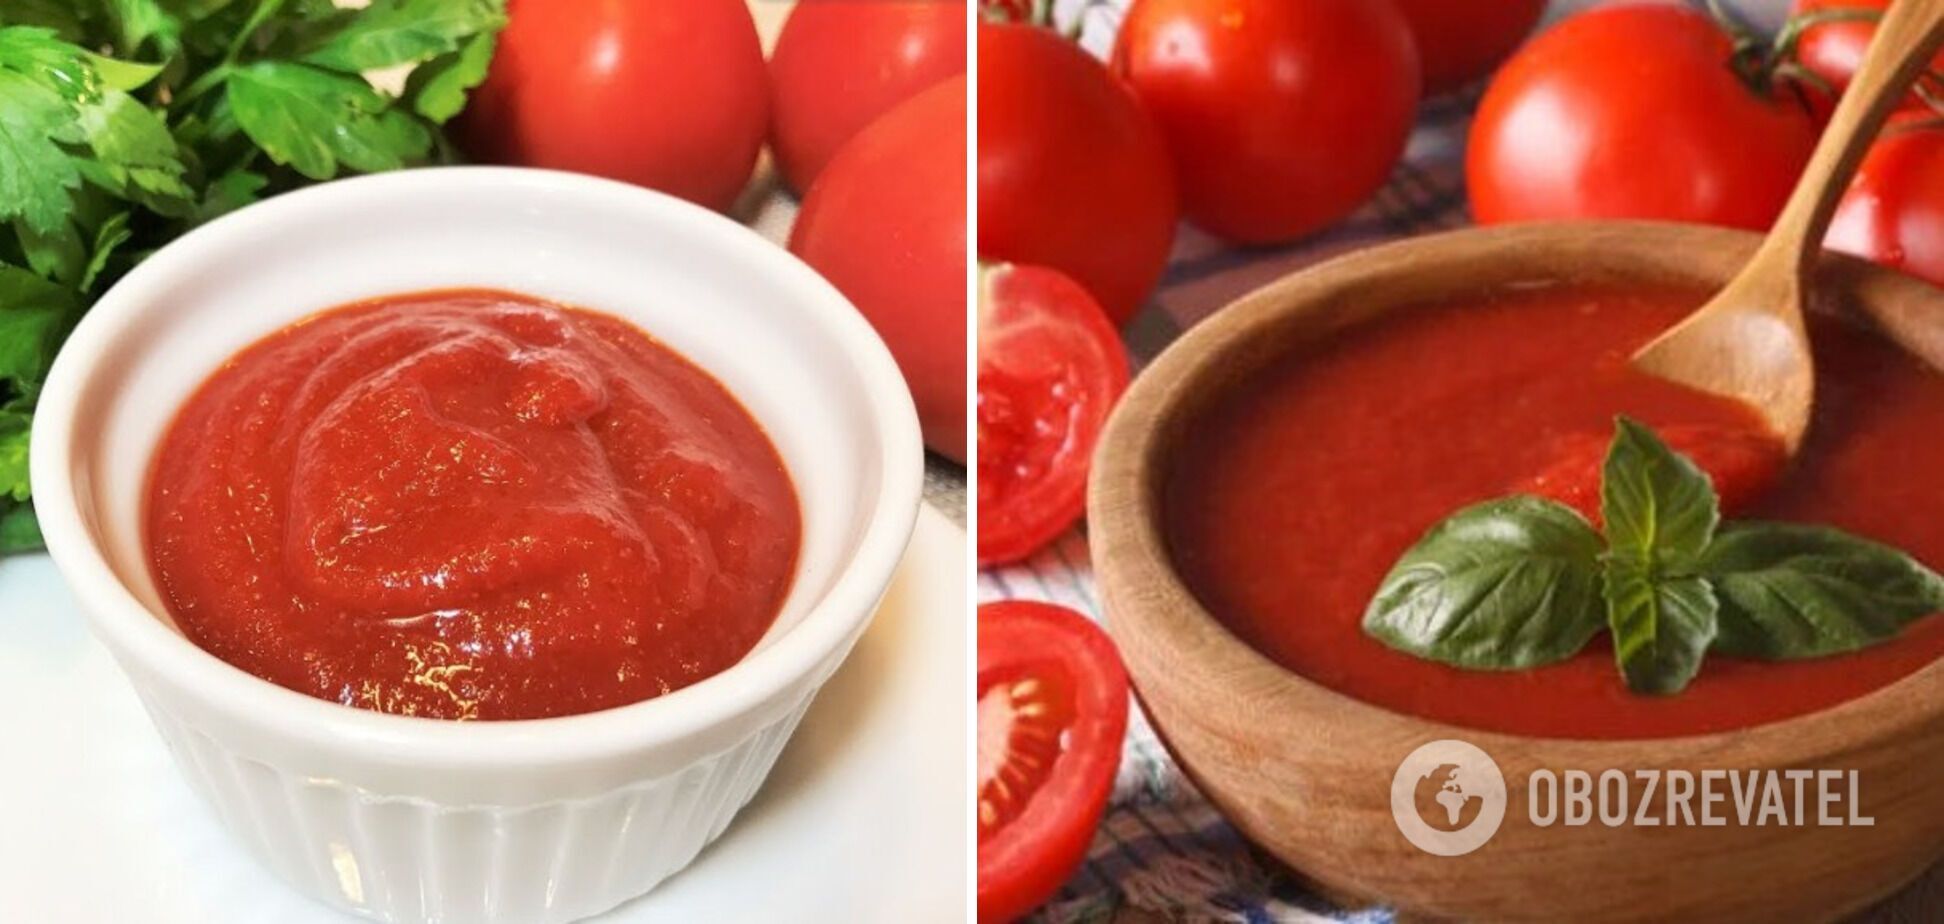 Thick tomato and apple ketchup